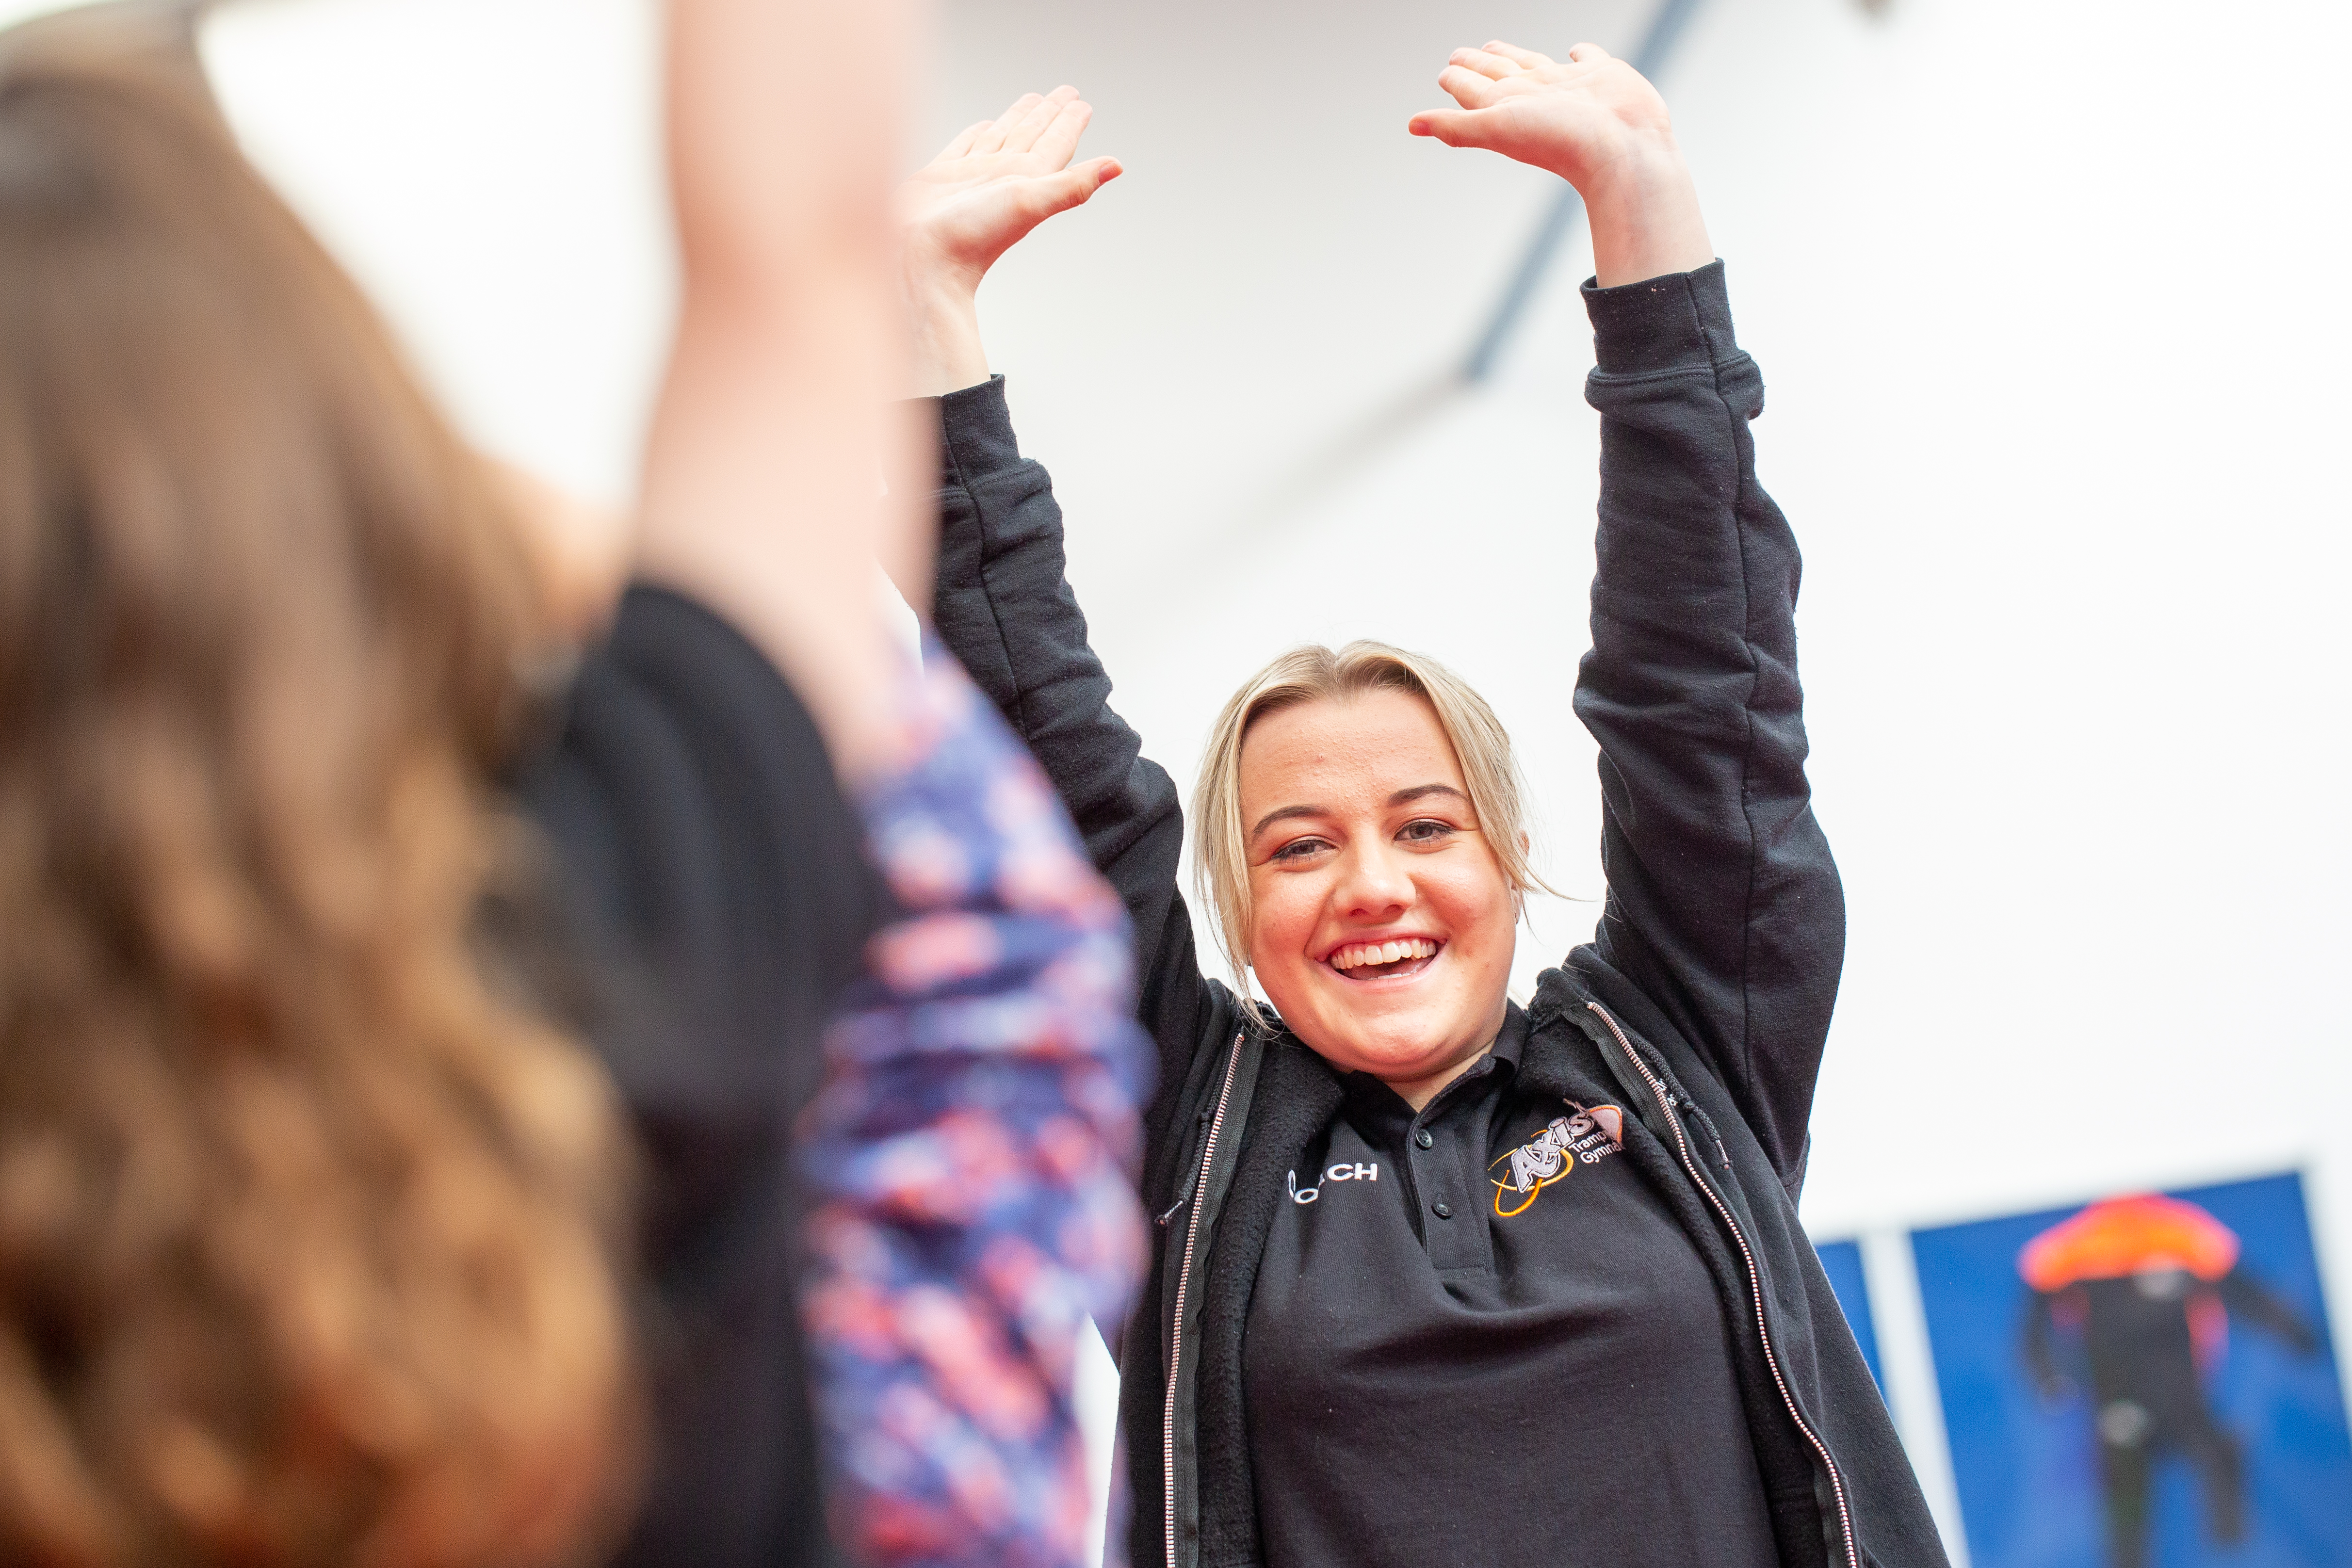 How to coach trampolining to kids - coach Hermione takes part in a warm-up game with the children